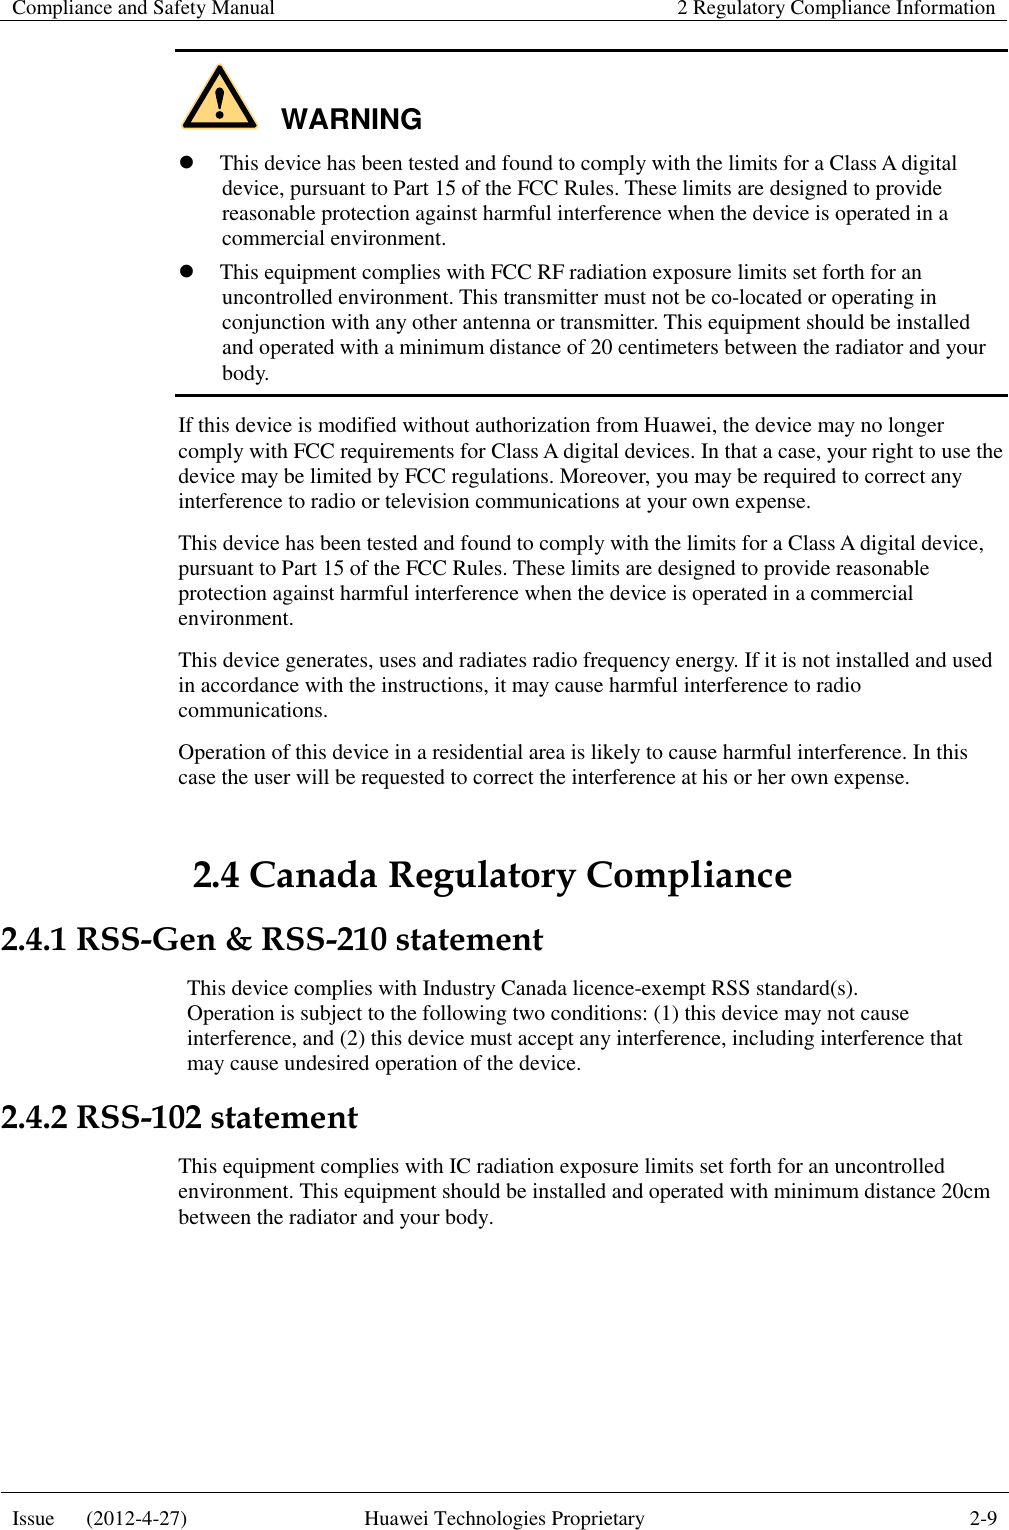 Compliance and Safety Manual 2 Regulatory Compliance Information  Issue      (2012-4-27) Huawei Technologies Proprietary 2-9  WARNING  This device has been tested and found to comply with the limits for a Class A digital device, pursuant to Part 15 of the FCC Rules. These limits are designed to provide reasonable protection against harmful interference when the device is operated in a commercial environment.  This equipment complies with FCC RF radiation exposure limits set forth for an uncontrolled environment. This transmitter must not be co-located or operating in conjunction with any other antenna or transmitter. This equipment should be installed and operated with a minimum distance of 20 centimeters between the radiator and your body. If this device is modified without authorization from Huawei, the device may no longer comply with FCC requirements for Class A digital devices. In that a case, your right to use the device may be limited by FCC regulations. Moreover, you may be required to correct any interference to radio or television communications at your own expense. This device has been tested and found to comply with the limits for a Class A digital device, pursuant to Part 15 of the FCC Rules. These limits are designed to provide reasonable protection against harmful interference when the device is operated in a commercial environment. This device generates, uses and radiates radio frequency energy. If it is not installed and used in accordance with the instructions, it may cause harmful interference to radio communications. Operation of this device in a residential area is likely to cause harmful interference. In this case the user will be requested to correct the interference at his or her own expense. 2.4 Canada Regulatory Compliance 2.4.1 RSS-Gen &amp; RSS-210 statement This device complies with Industry Canada licence-exempt RSS standard(s). Operation is subject to the following two conditions: (1) this device may not cause interference, and (2) this device must accept any interference, including interference that may cause undesired operation of the device. 2.4.2 RSS-102 statement This equipment complies with IC radiation exposure limits set forth for an uncontrolled environment. This equipment should be installed and operated with minimum distance 20cm between the radiator and your body. 